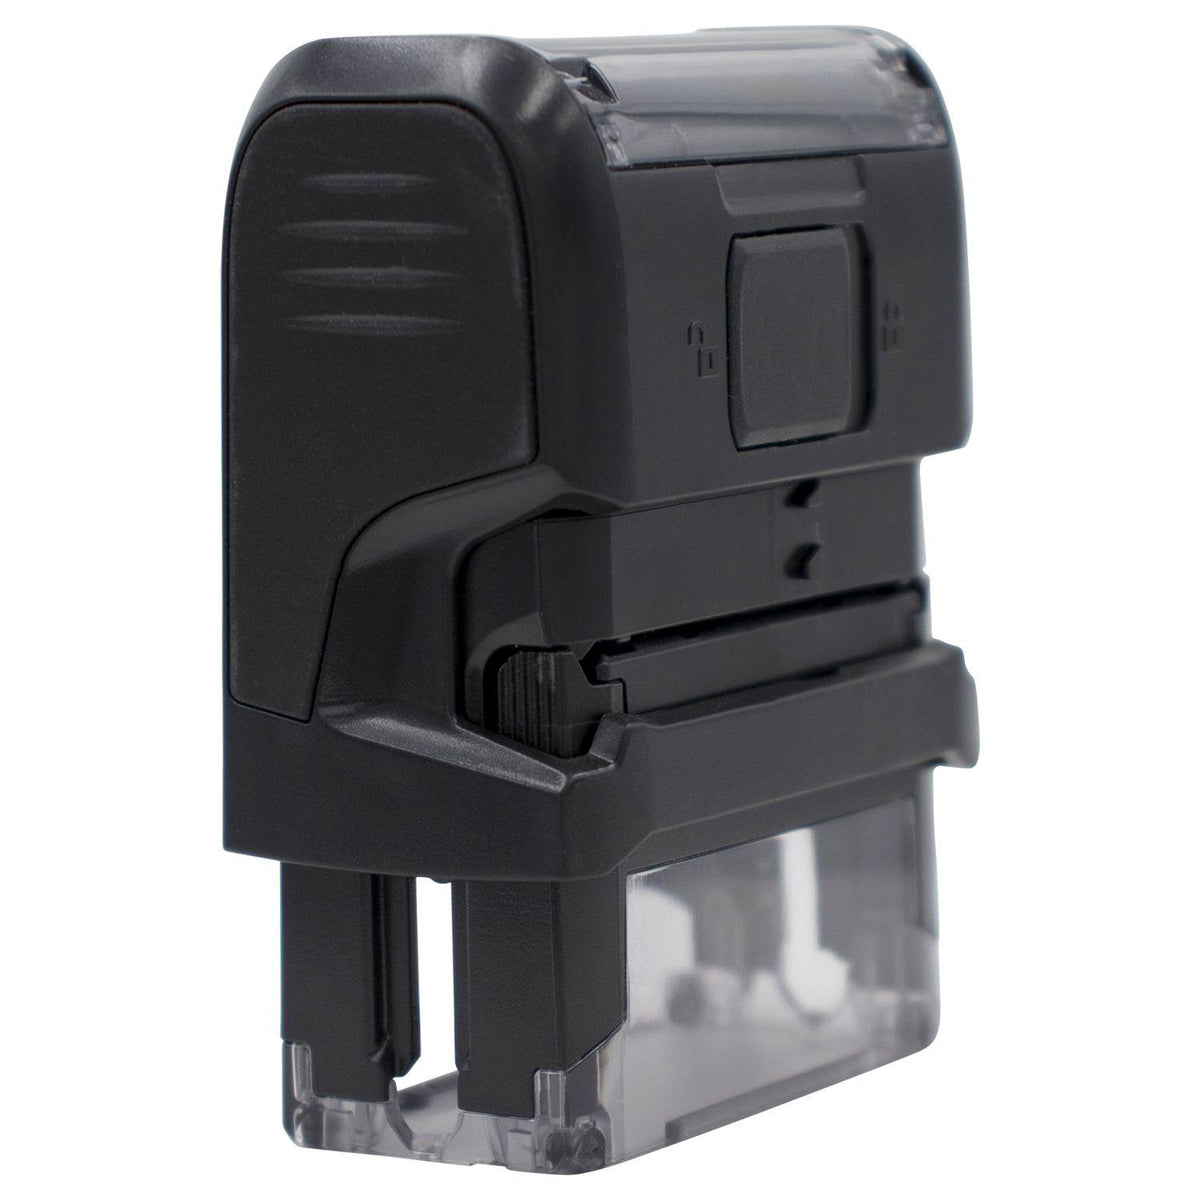 Large Self-Inking Received with Date Box Stamp - Engineer Seal Stamps - Brand_Trodat, Impression Size_Large, Stamp Type_Self-Inking Stamp, Type of Use_Shipping &amp; Receiving